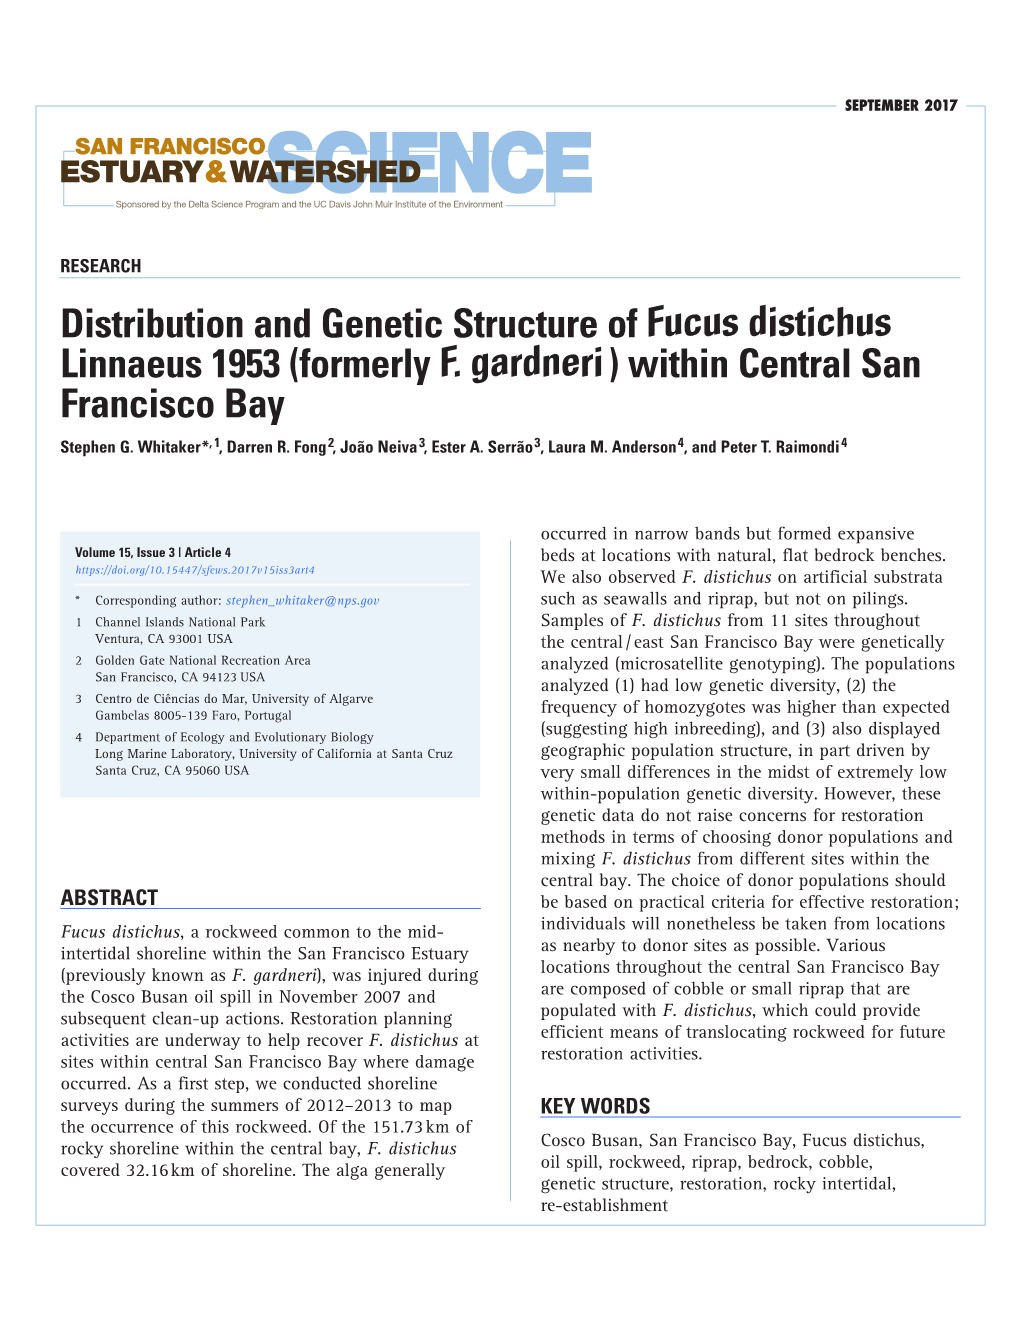 Distribution and Genetic Structure of Fucus Distichus Linnaeus 1953 (Formerly F